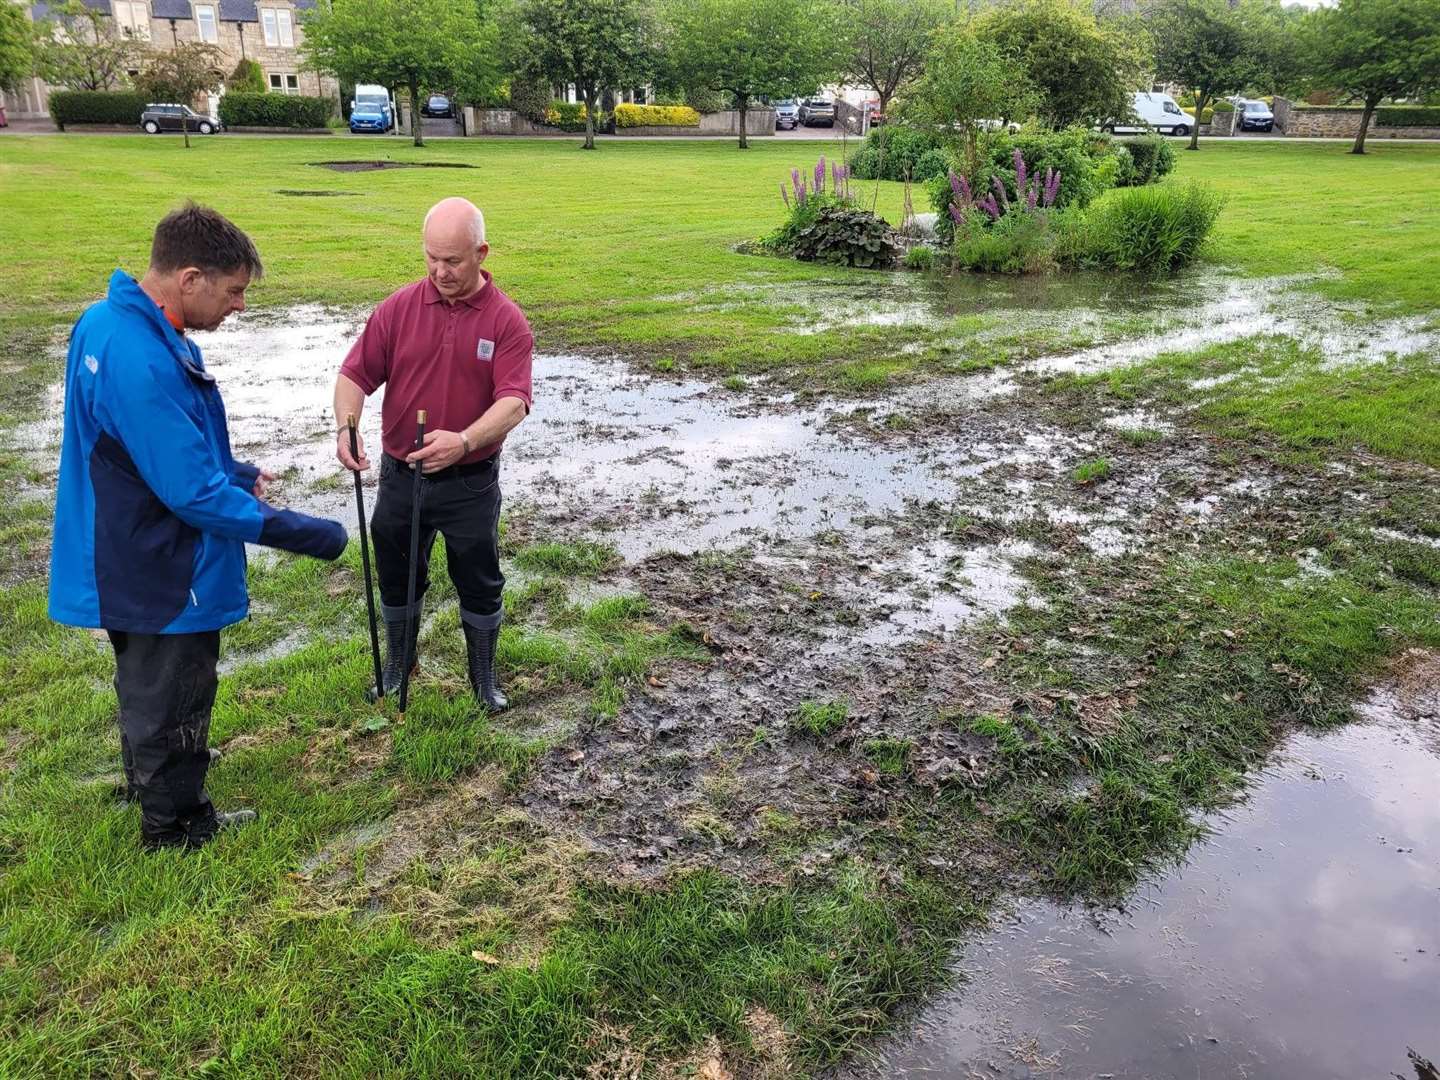 Community council member John Innes (right) inspecting flood damage and sewage between Applegrove and Sanquhar Road.